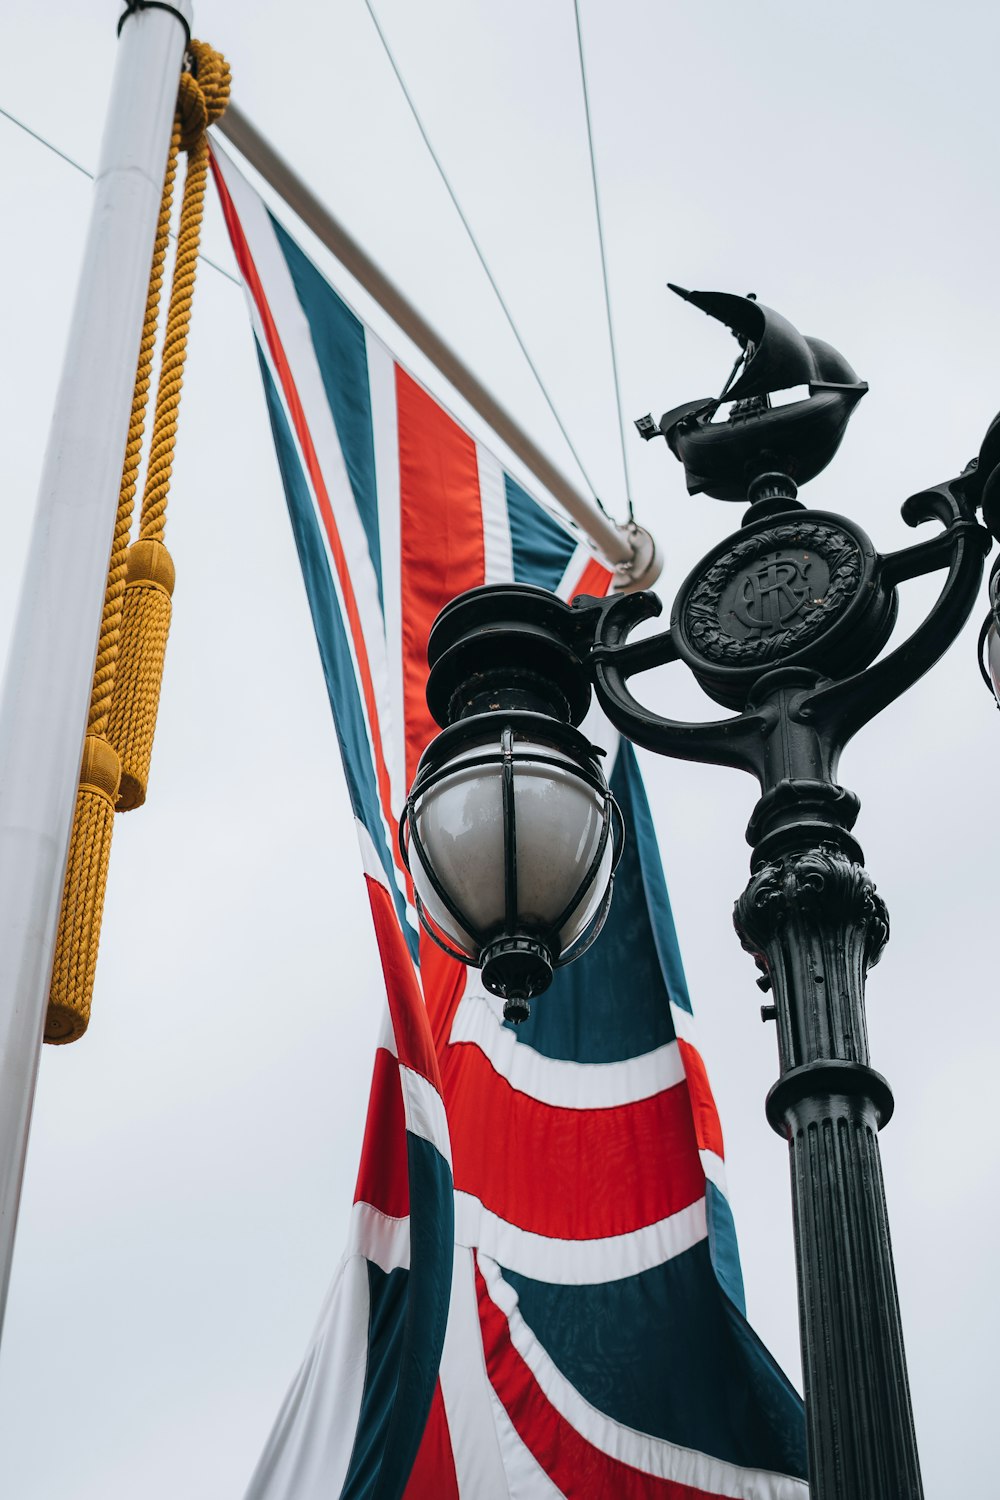 a lamp post with a british flag on it